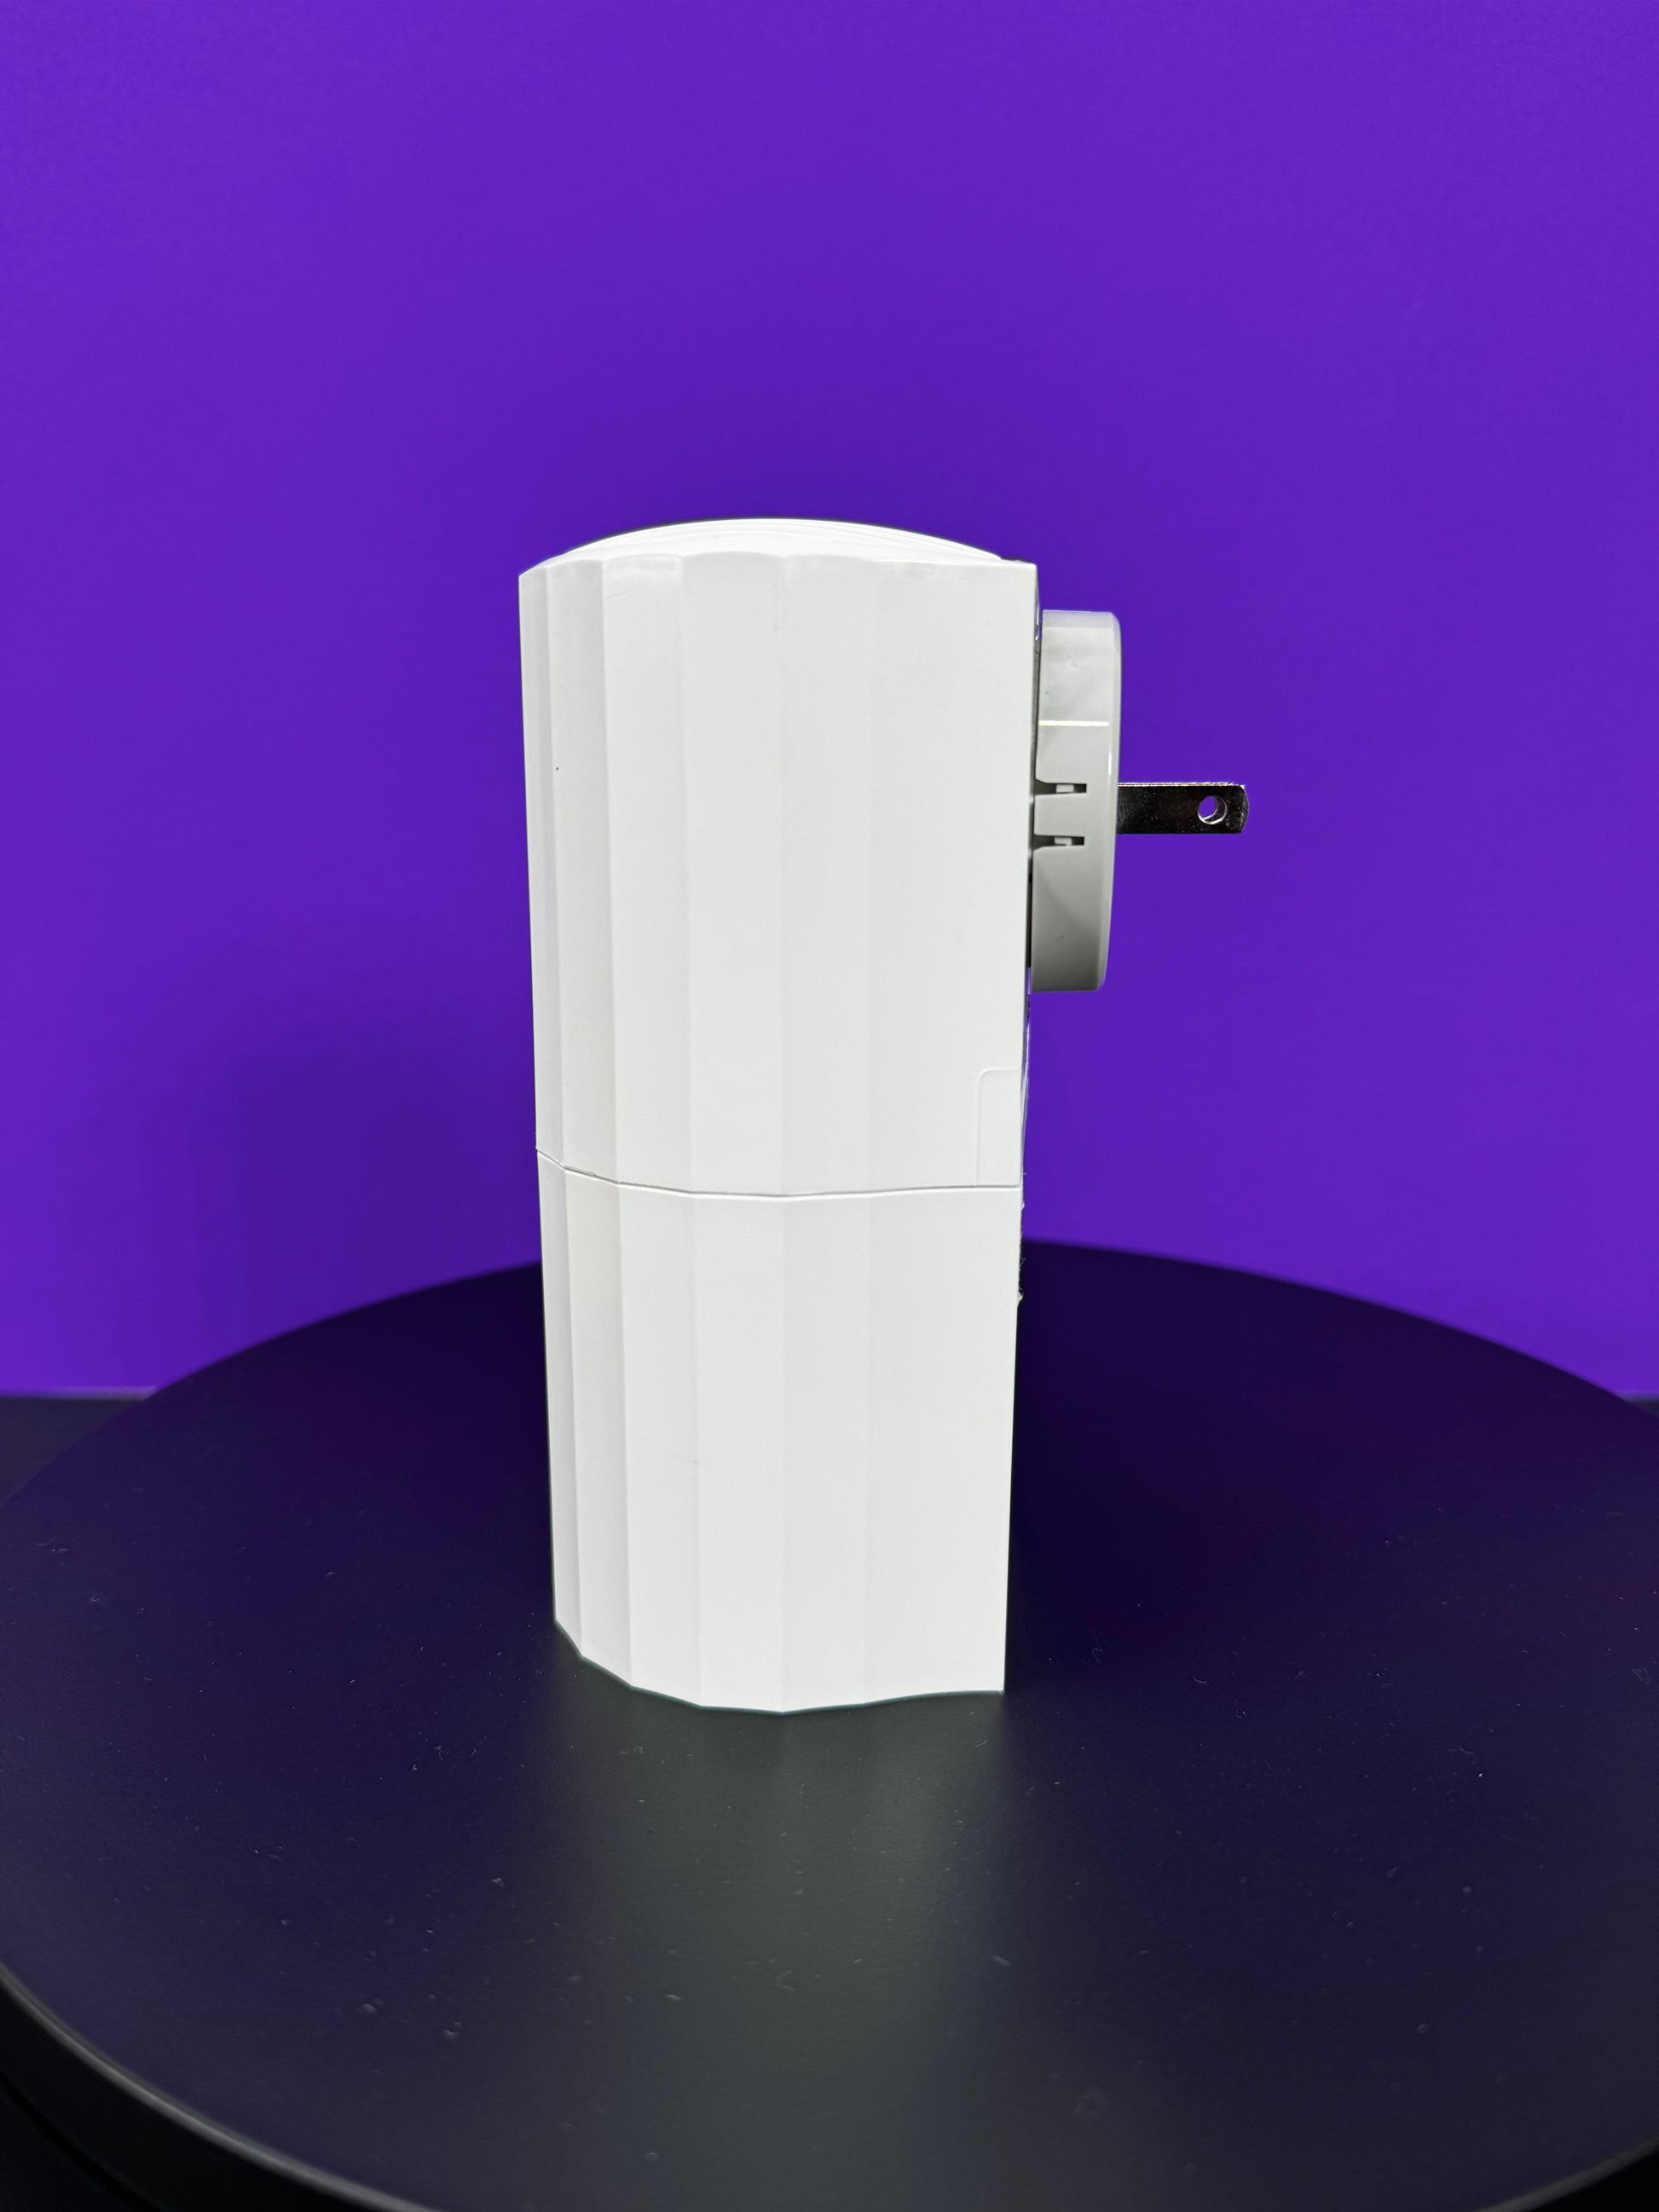 A white box sitting on a table against a purple background; it is a DA Plug In Scent Diffuser for a waterless solution.